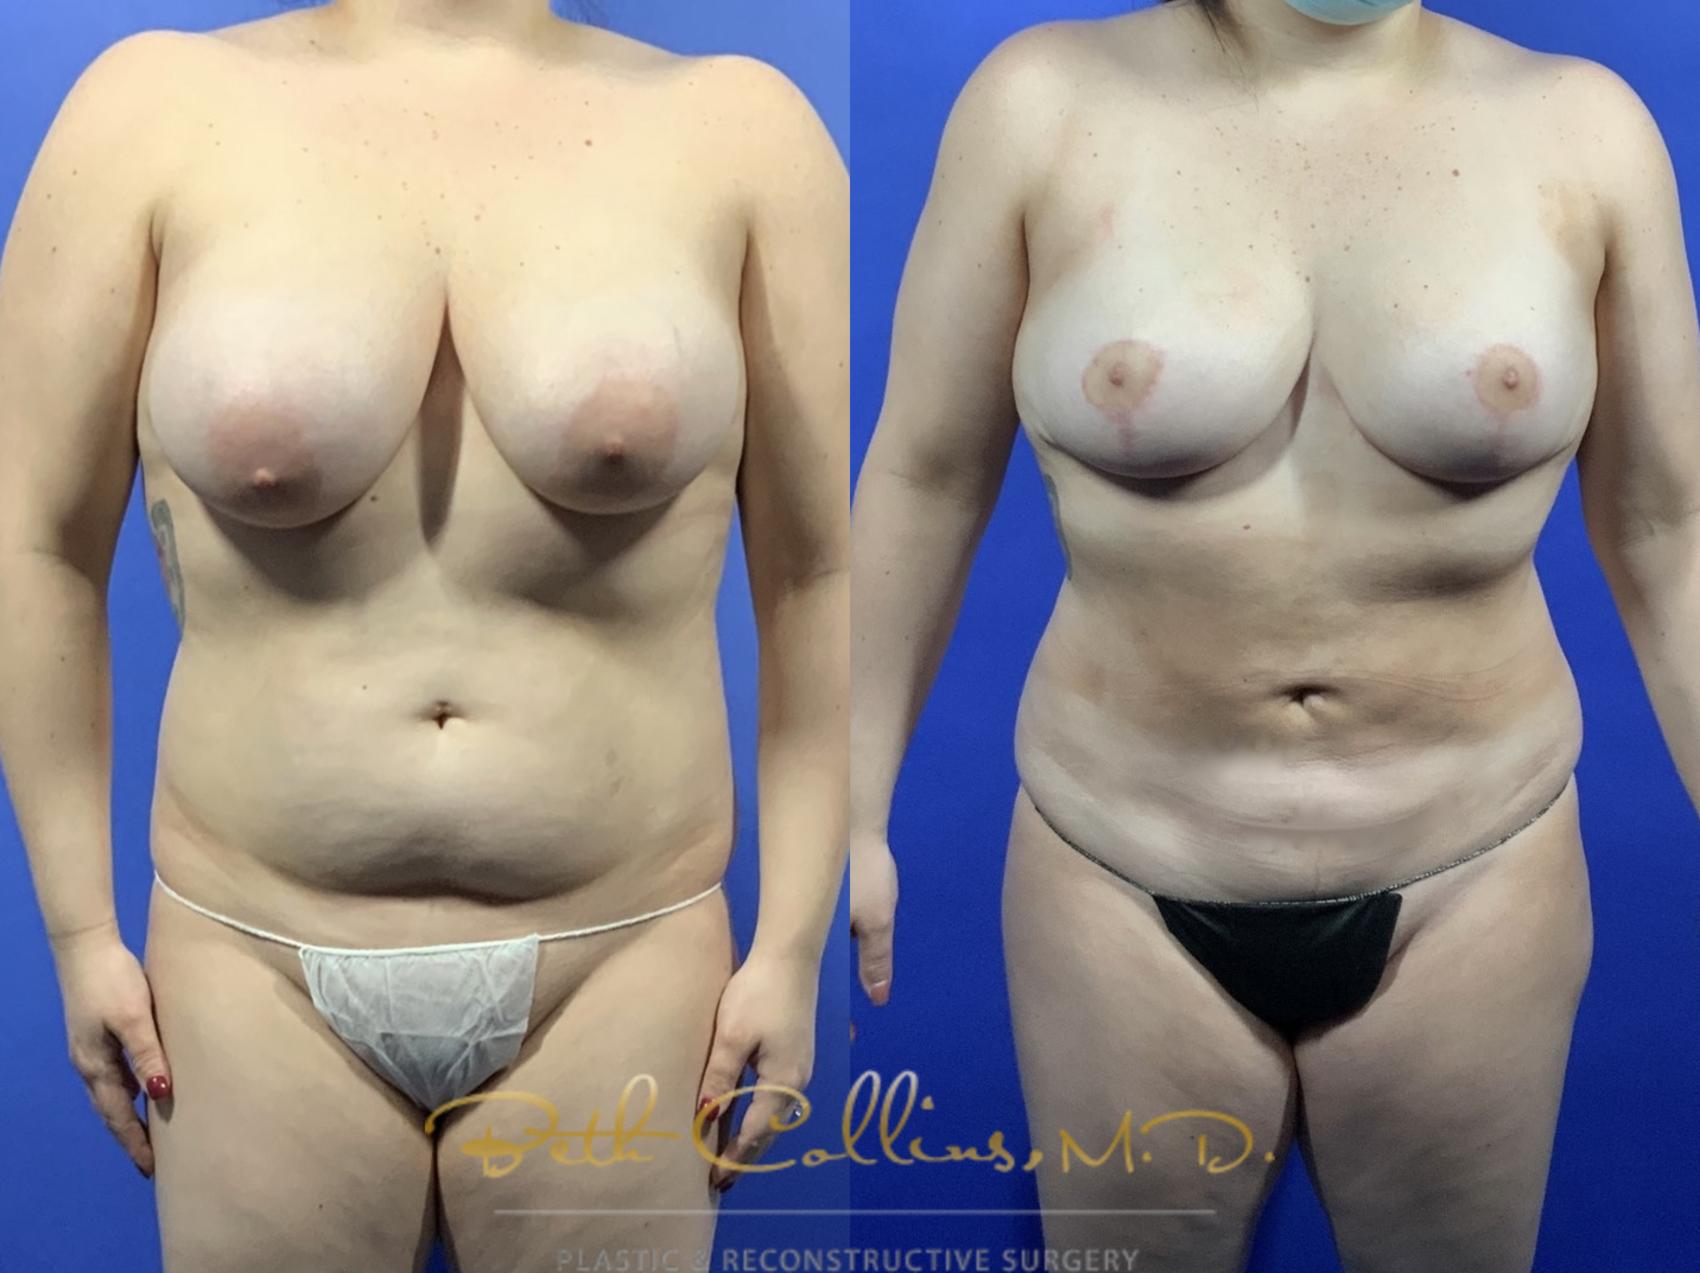 Breast reduction with abdominal liposuction